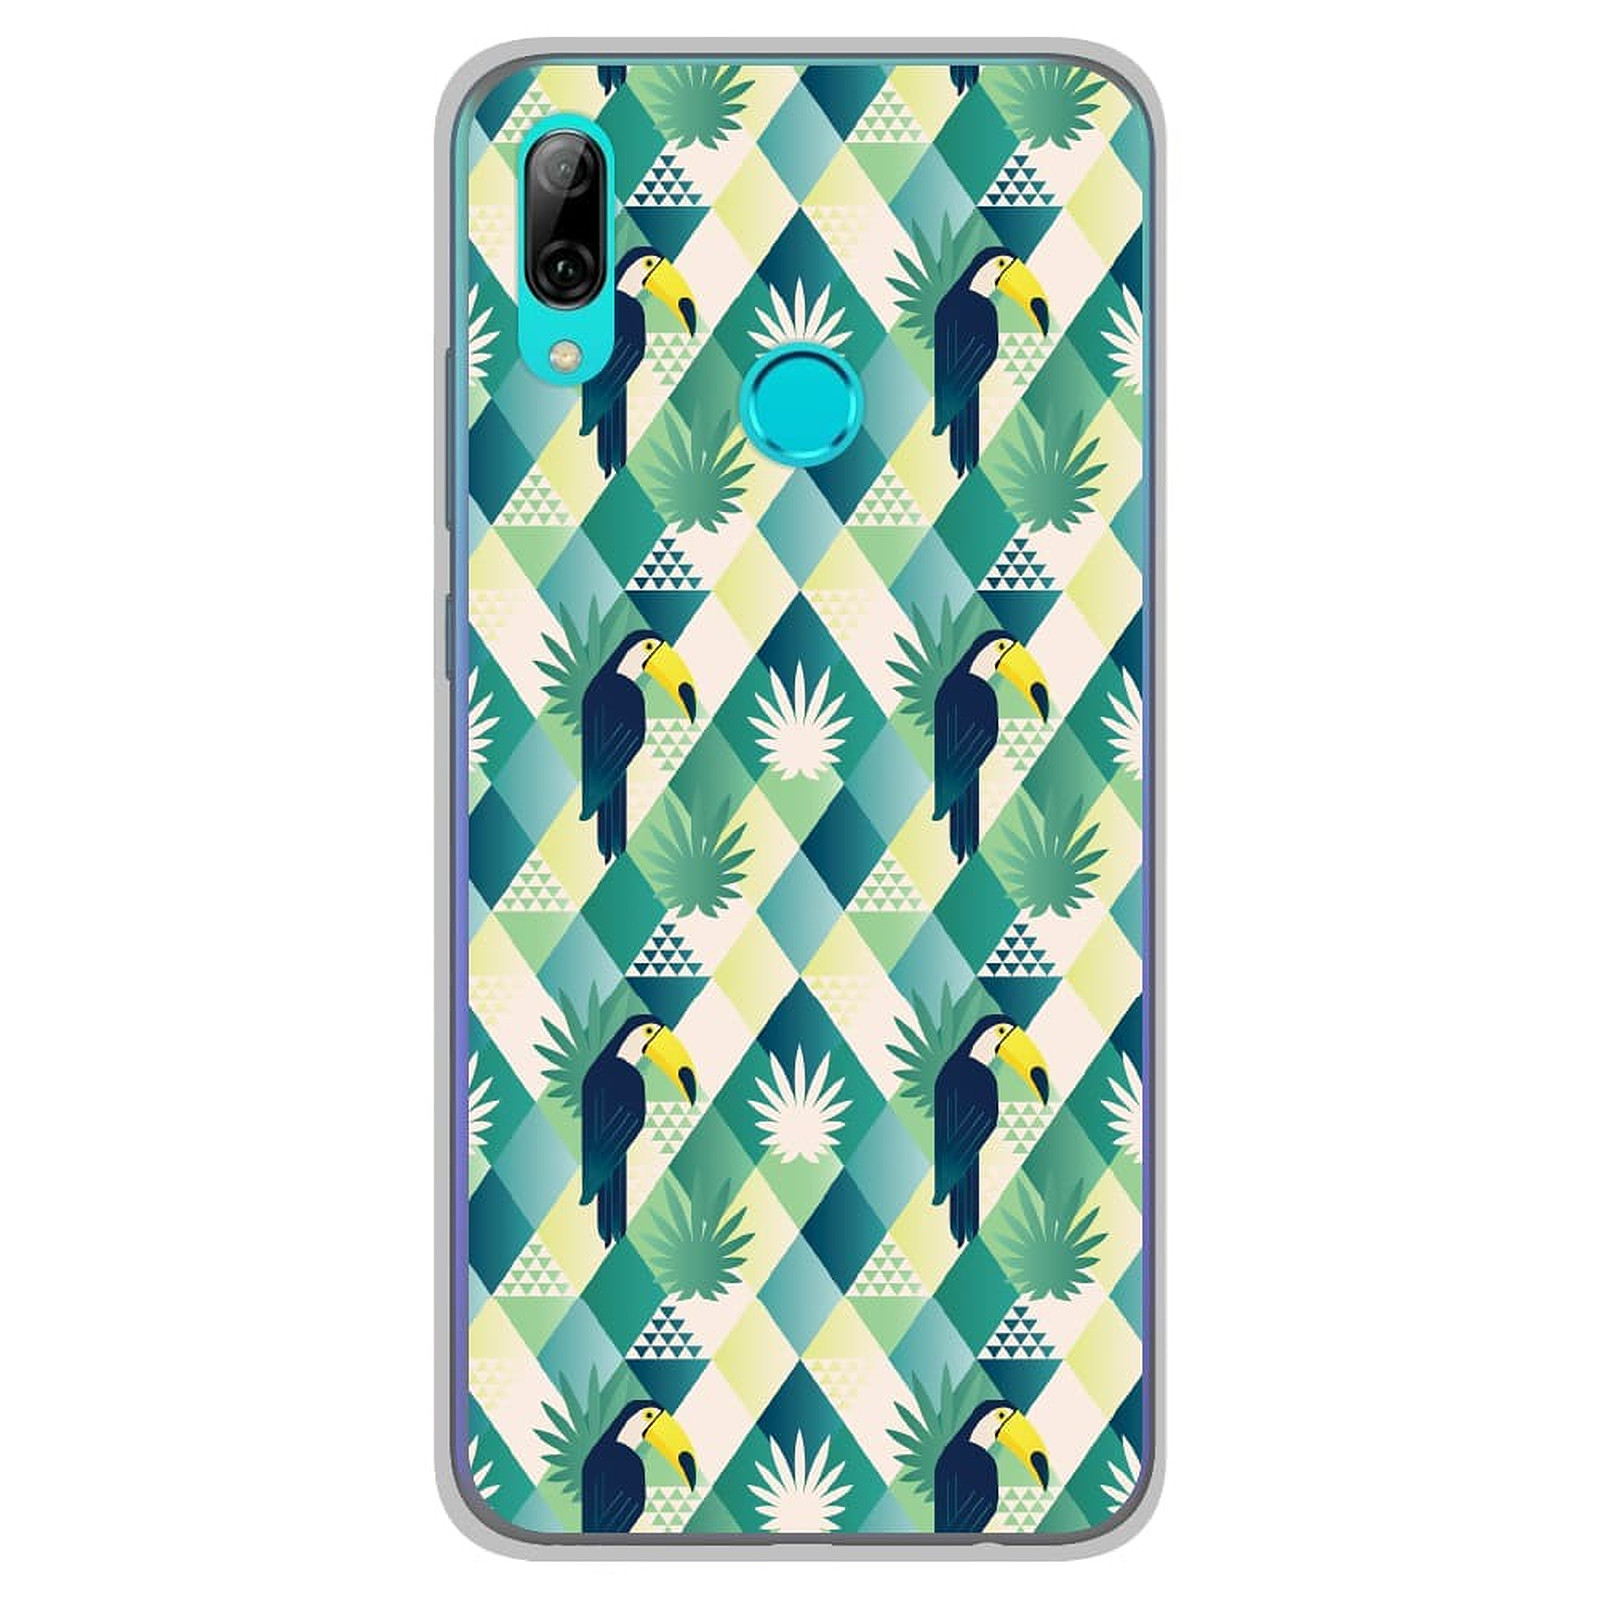 1001 Coques Coque silicone gel Huawei P Smart 2019 motif Toucan losange - Coque telephone 1001Coques